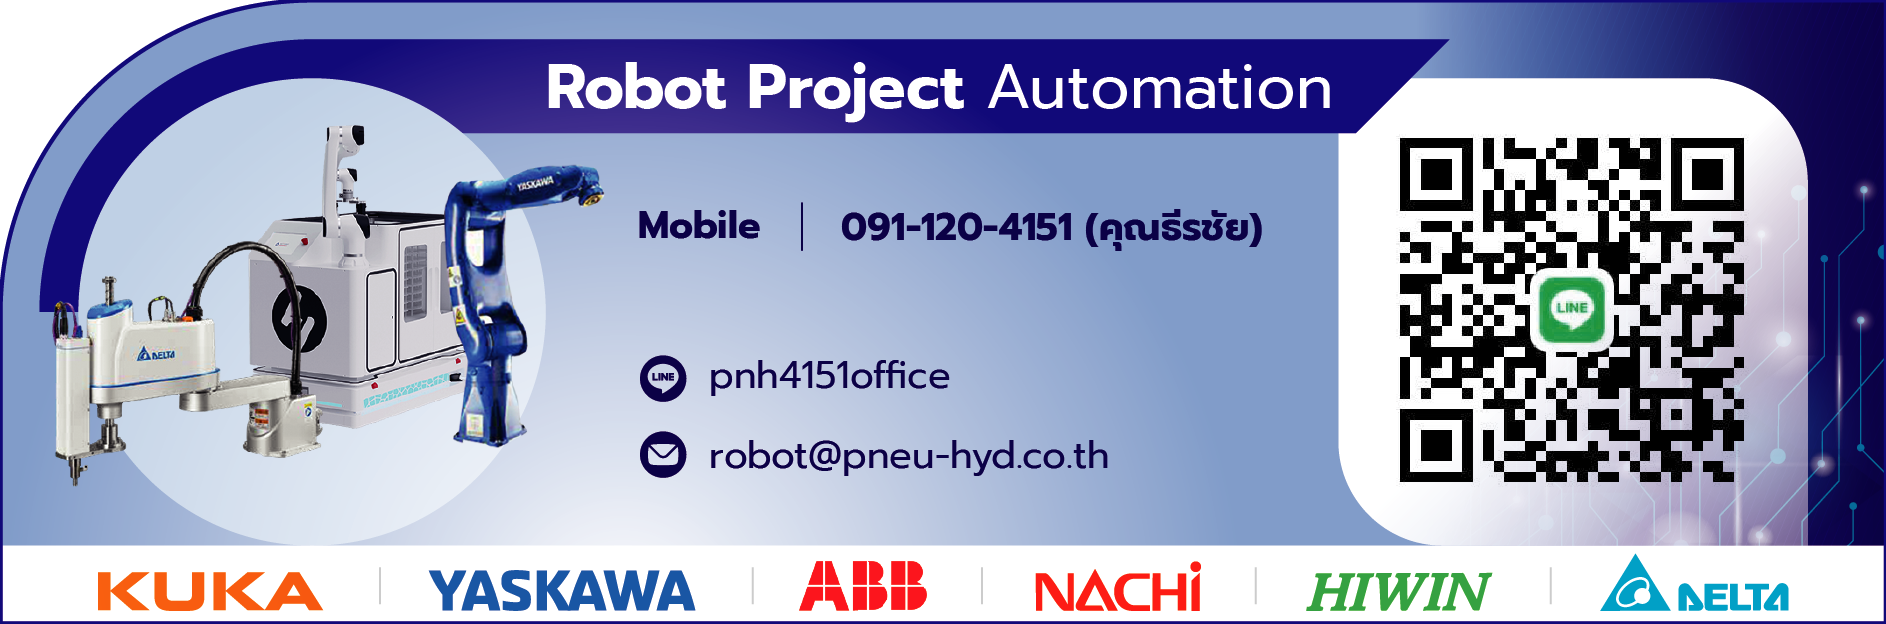 Robot Project Automation 1